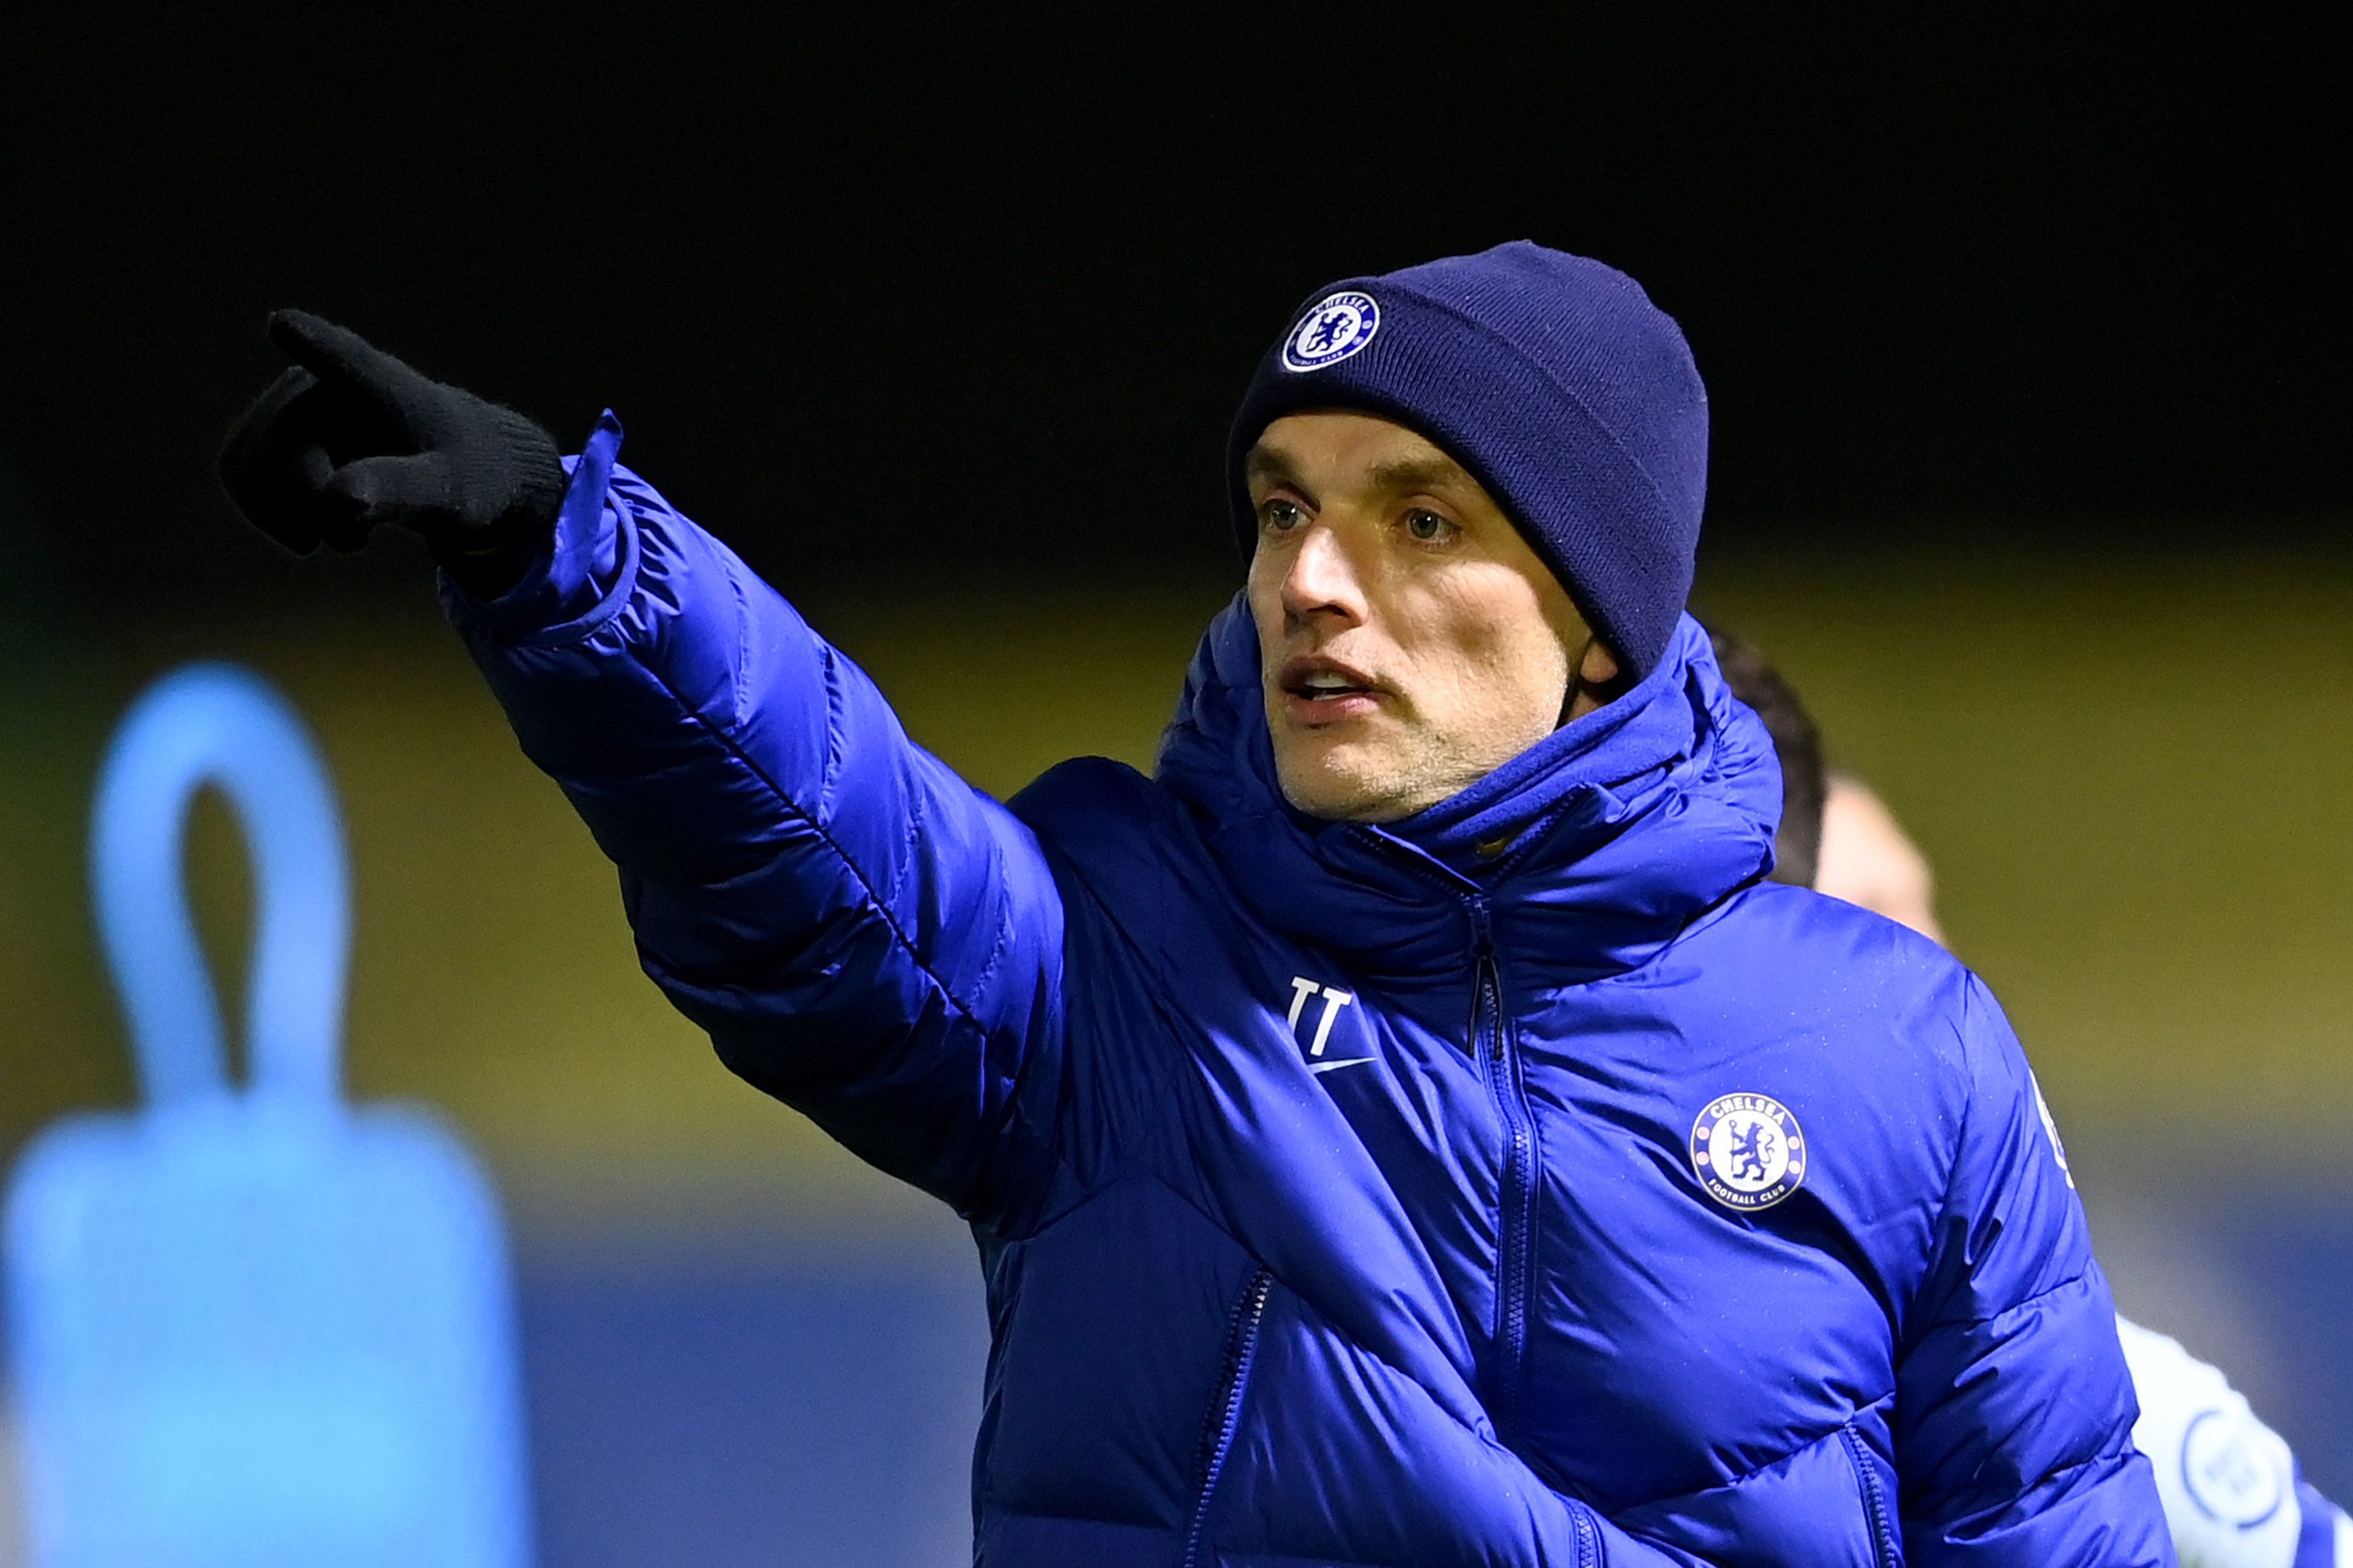 PICTURES: Thomas Tuchel's first training session as Chelsea head coach Ain't Got No History